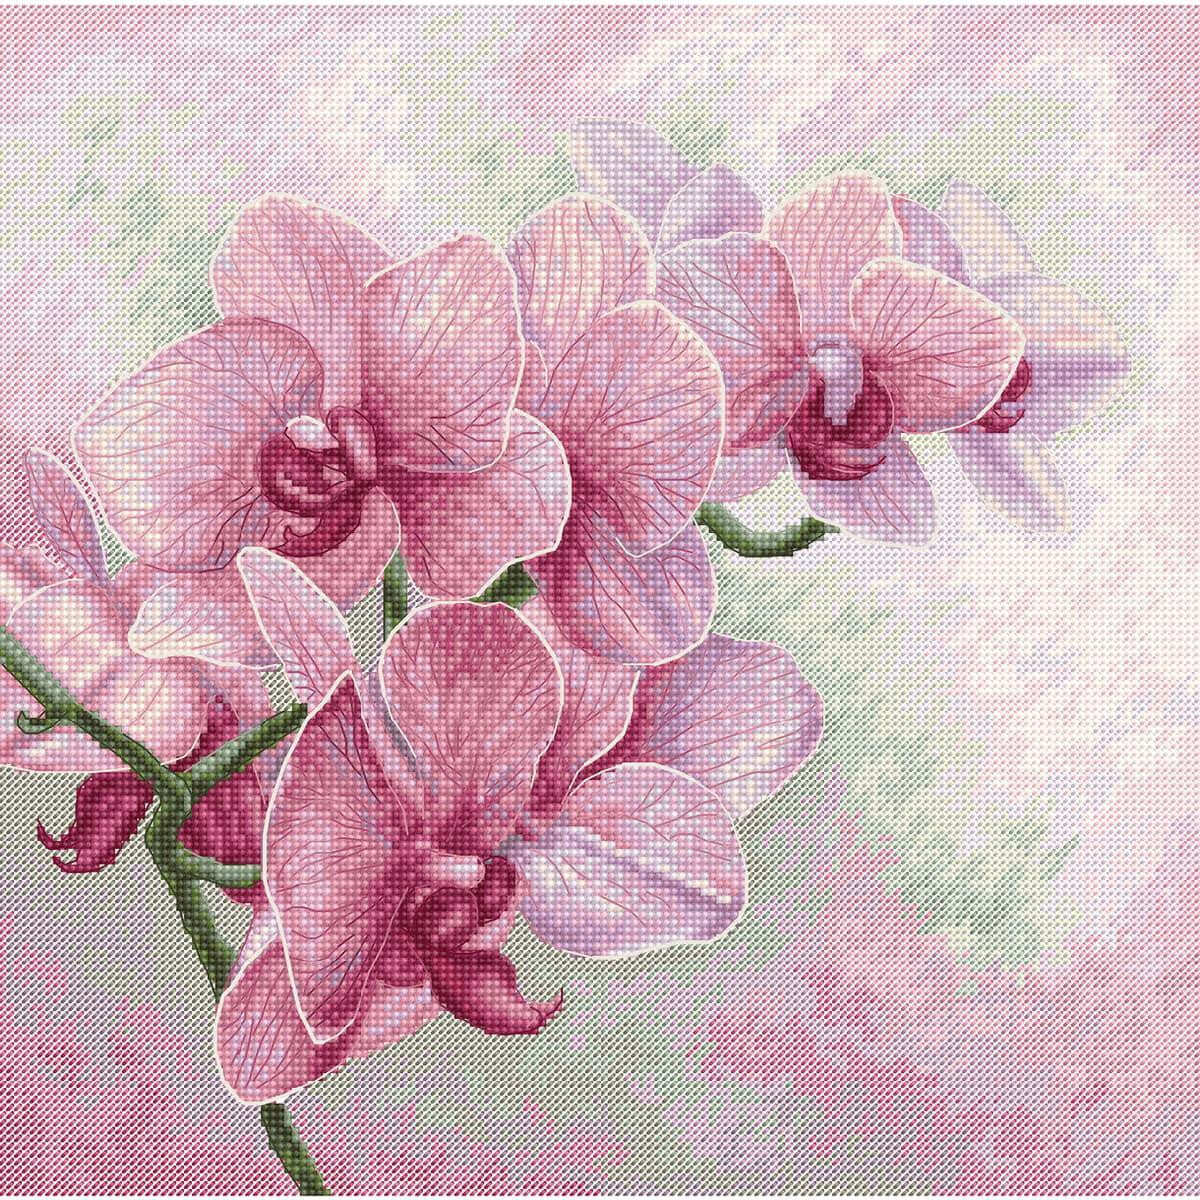 A pink cross stitch artwork shows a blooming orchid...